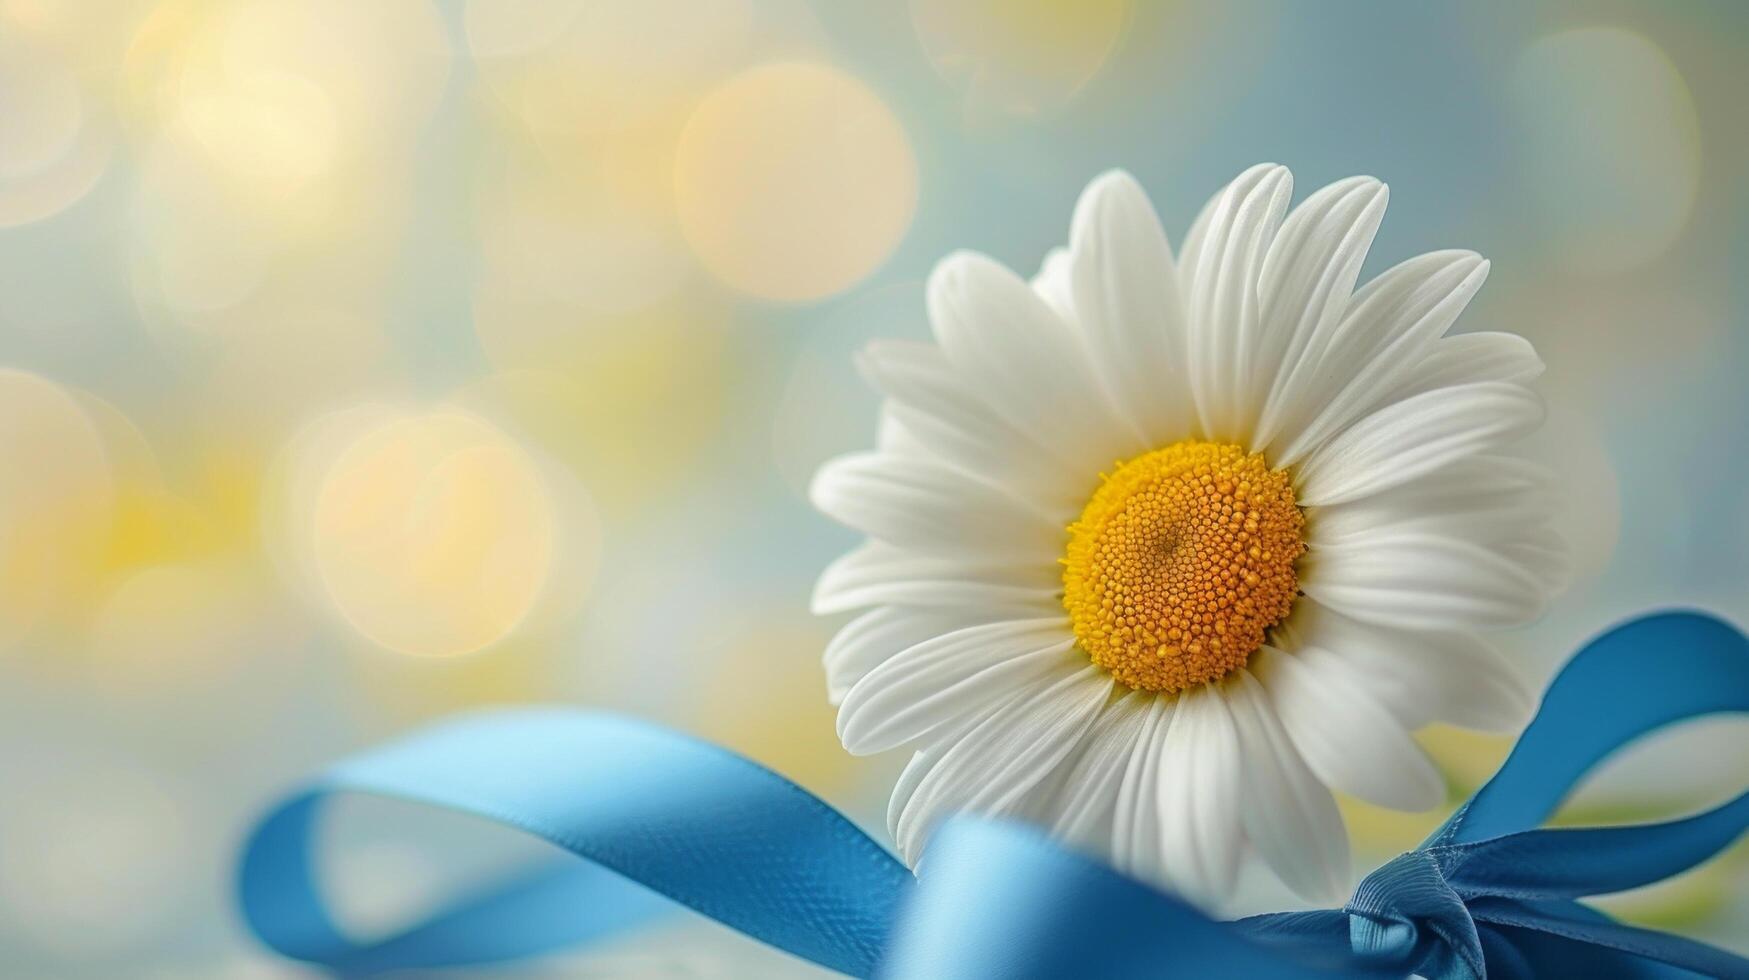 AI generated a single daisy with a blue ribbon, a subtle nod to Labor Day's colors photo